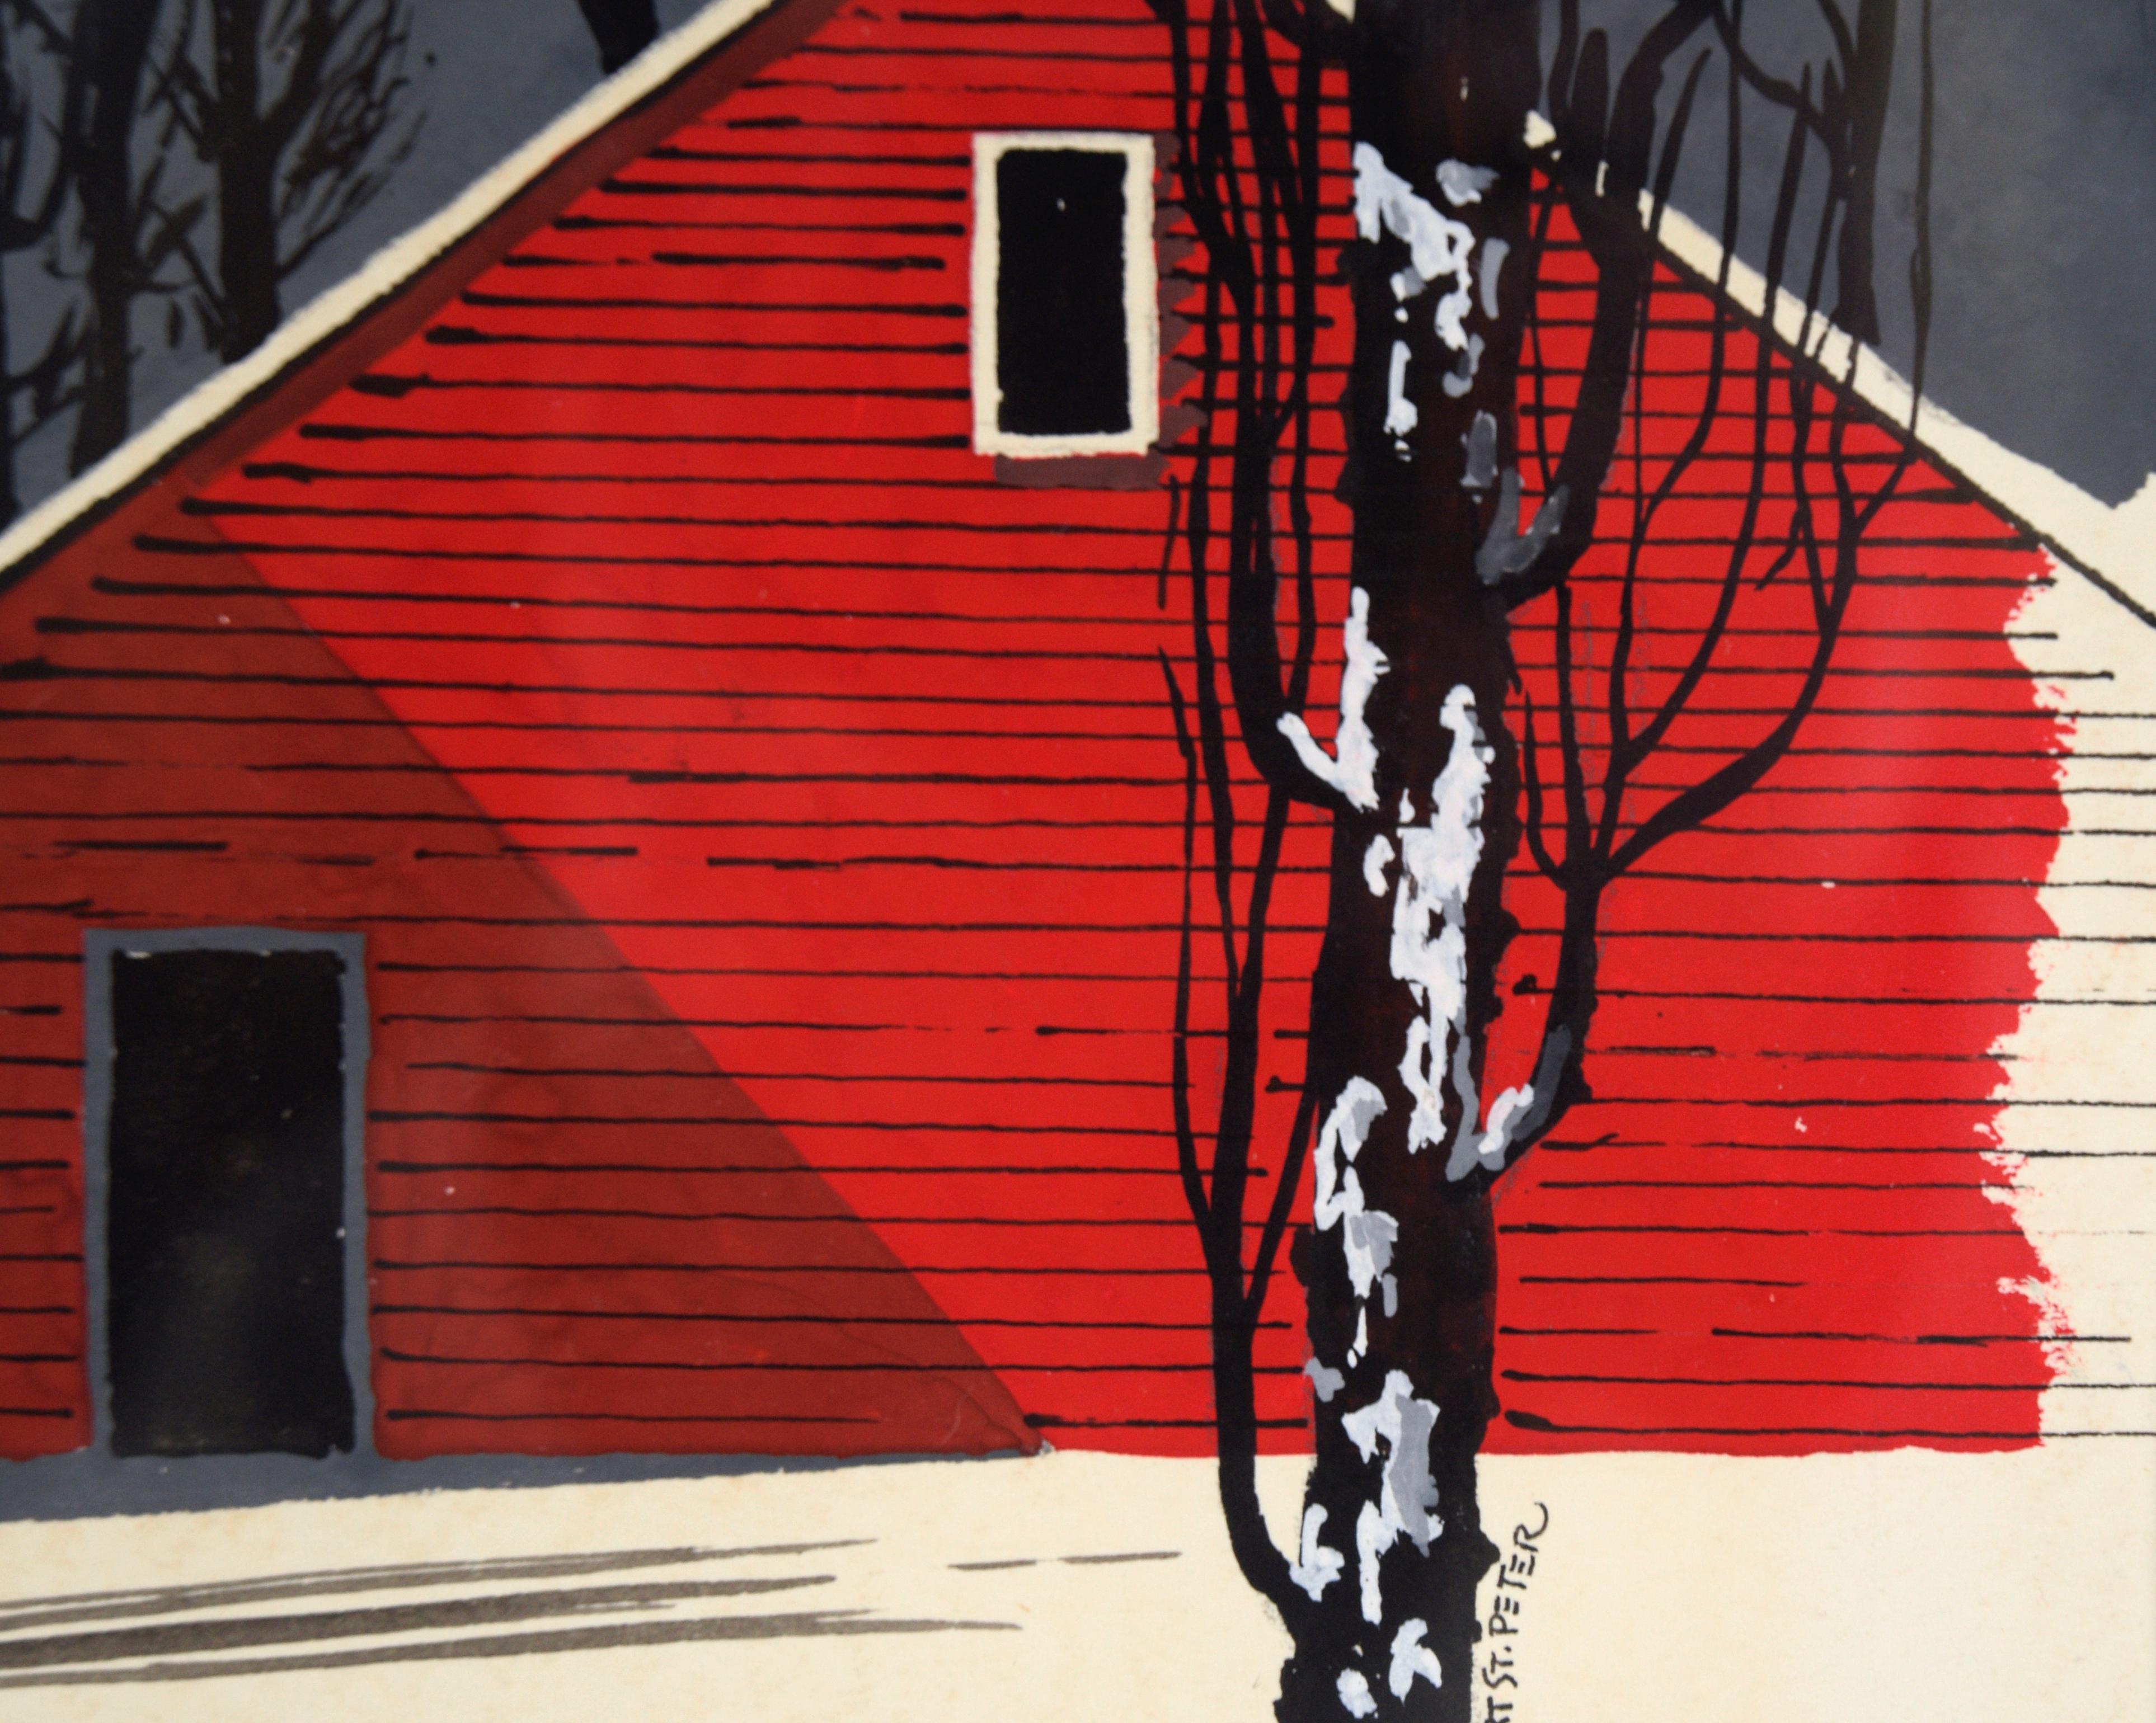 Red Barn in the Snow - Winter Landscape - Modern Painting by Art St. Peter